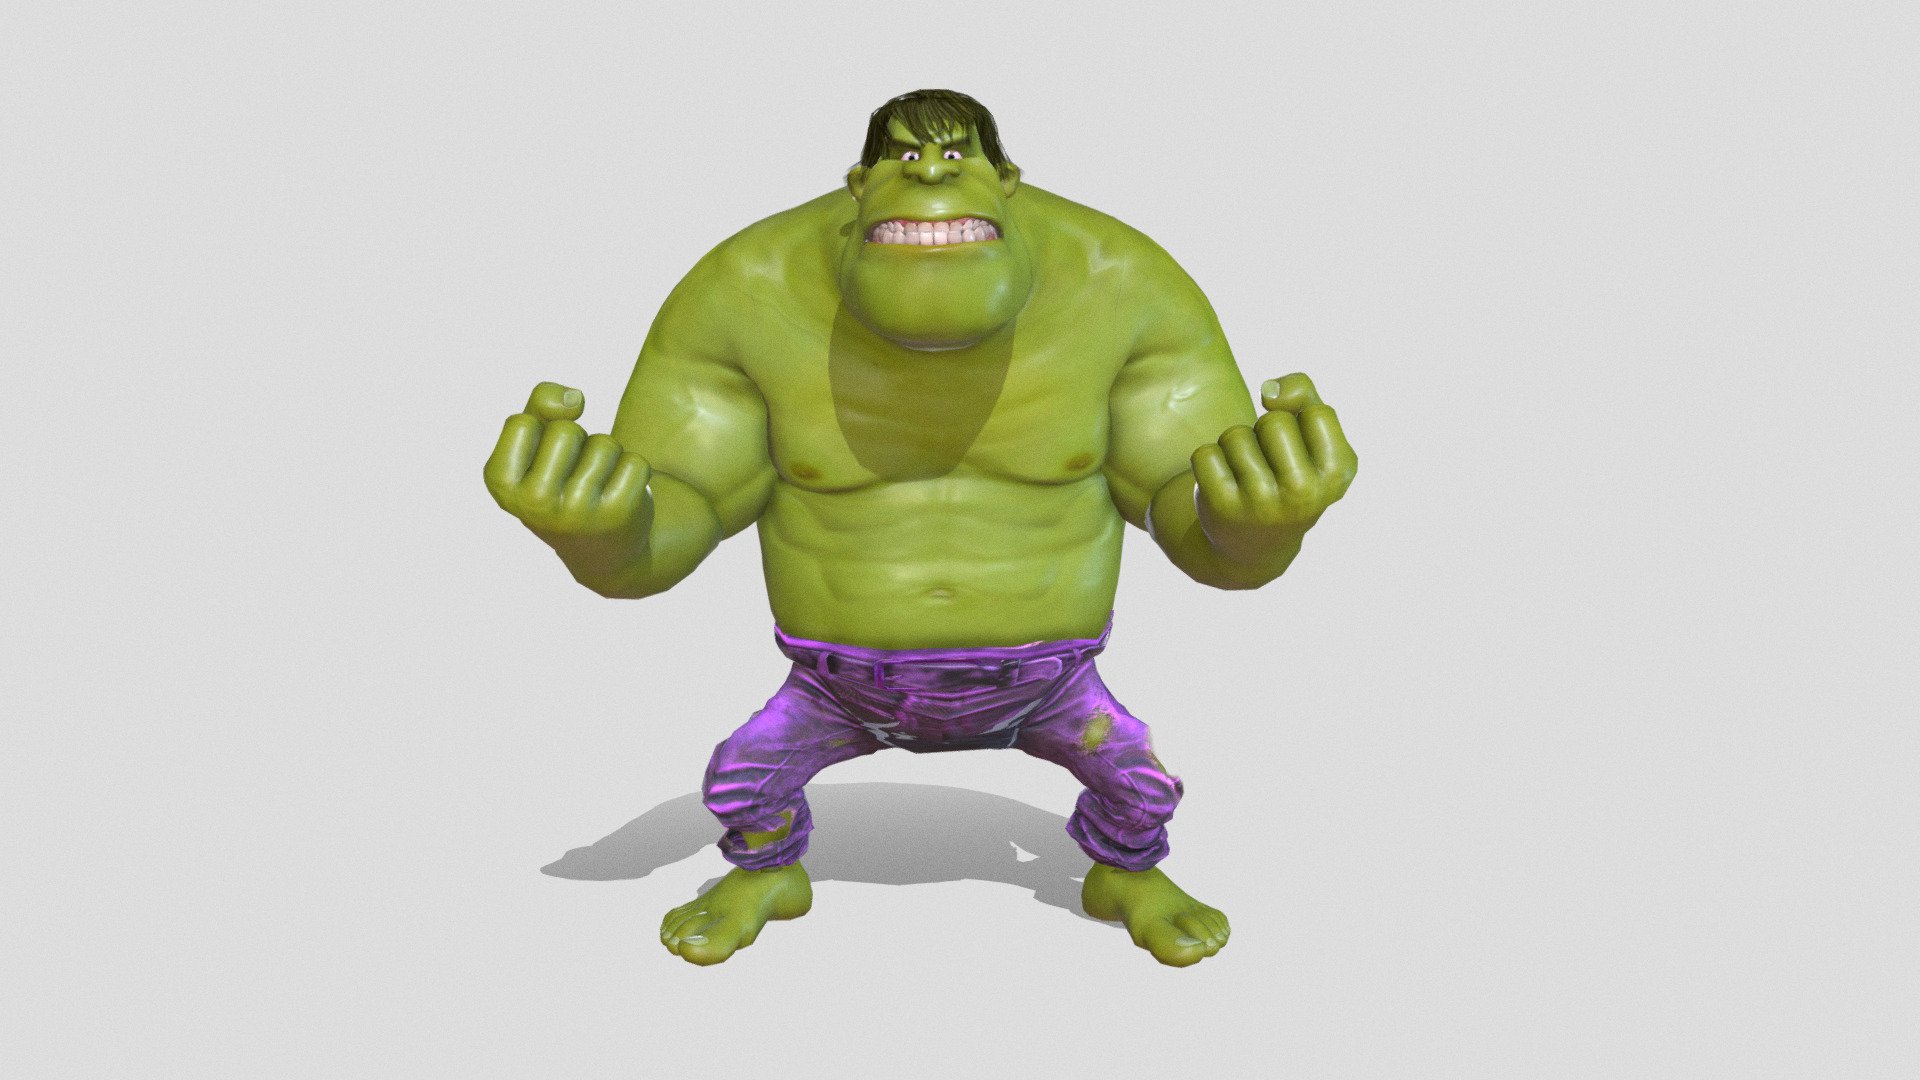 This is a Toon Hulk I created for Reallusion's Character Creator 3. I'm exploring the limits of the software's morphing system 3d model